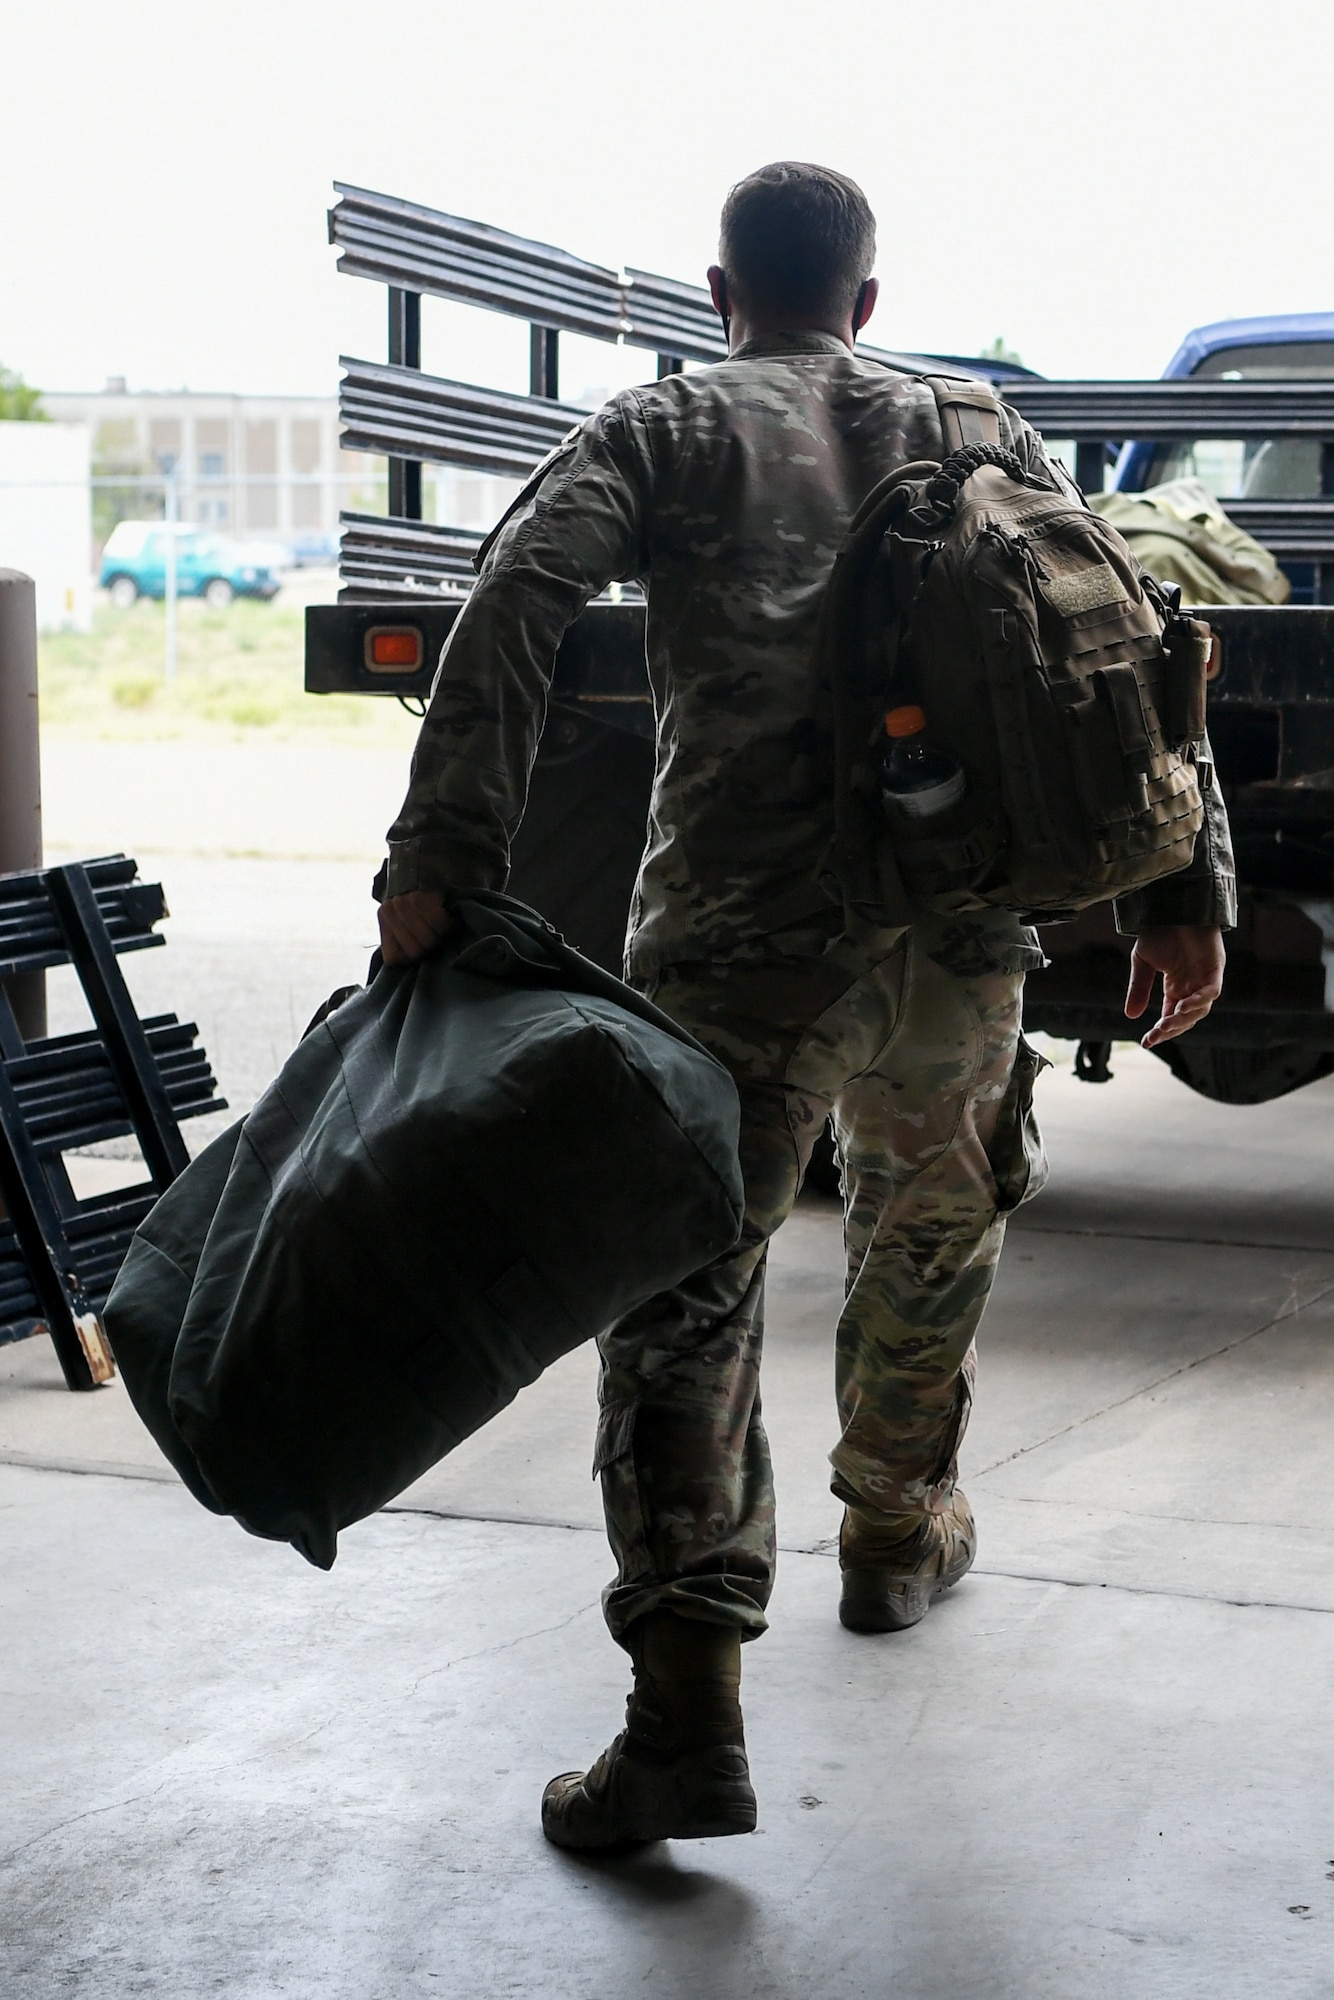 An Airman throws his deployment bag into the back of a flatbed truck.